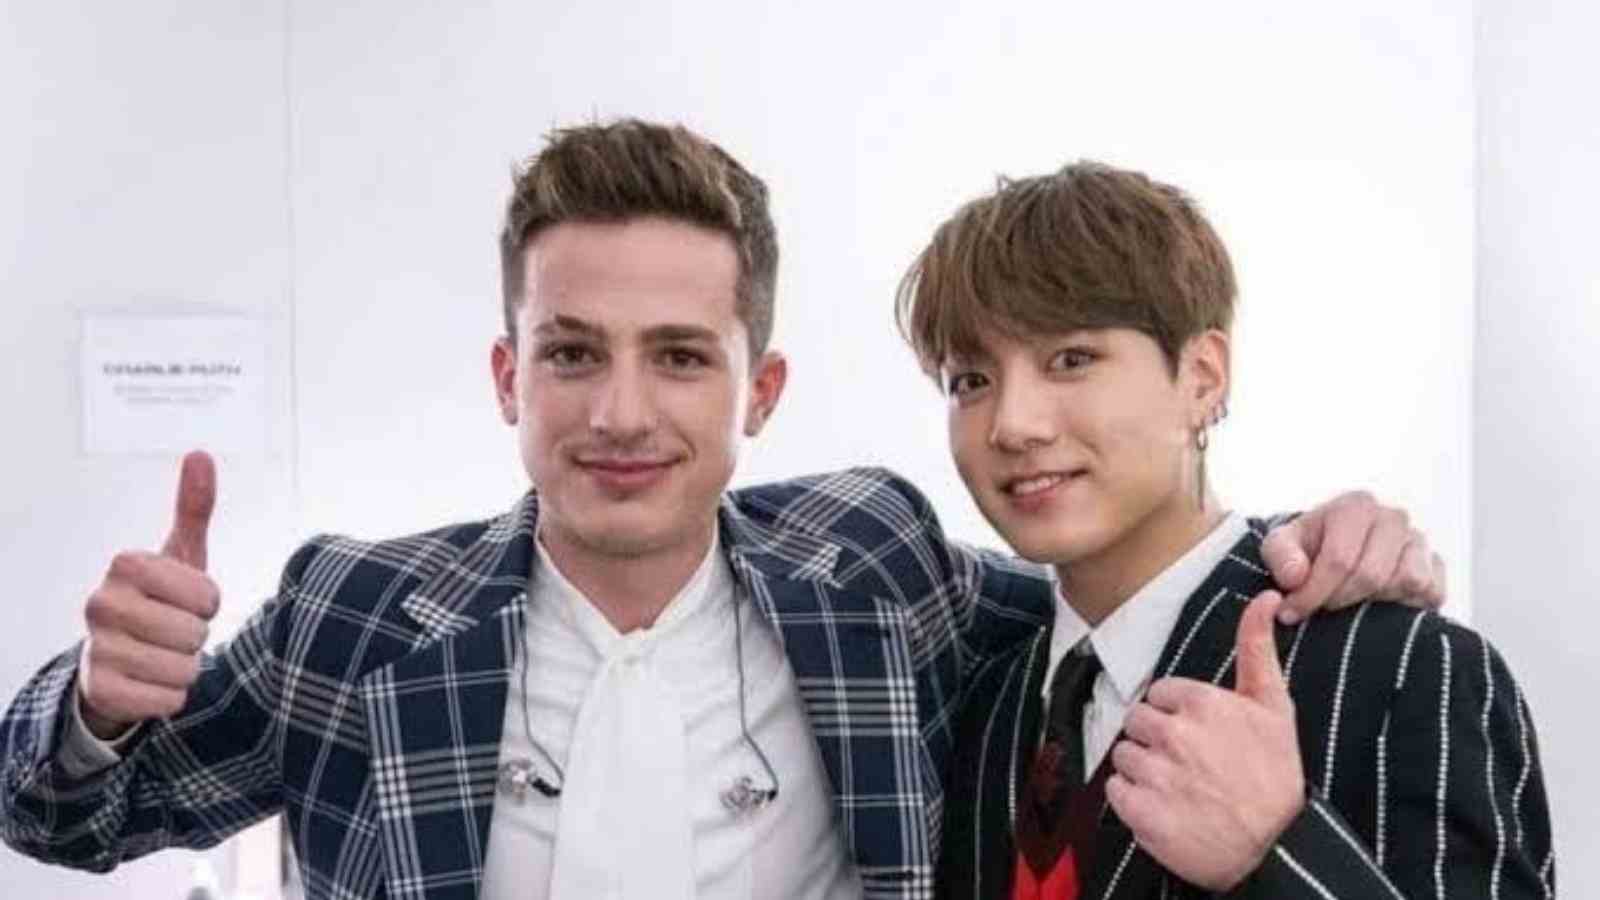 Charlie Puth gushes about Jungkook's attractive looks.